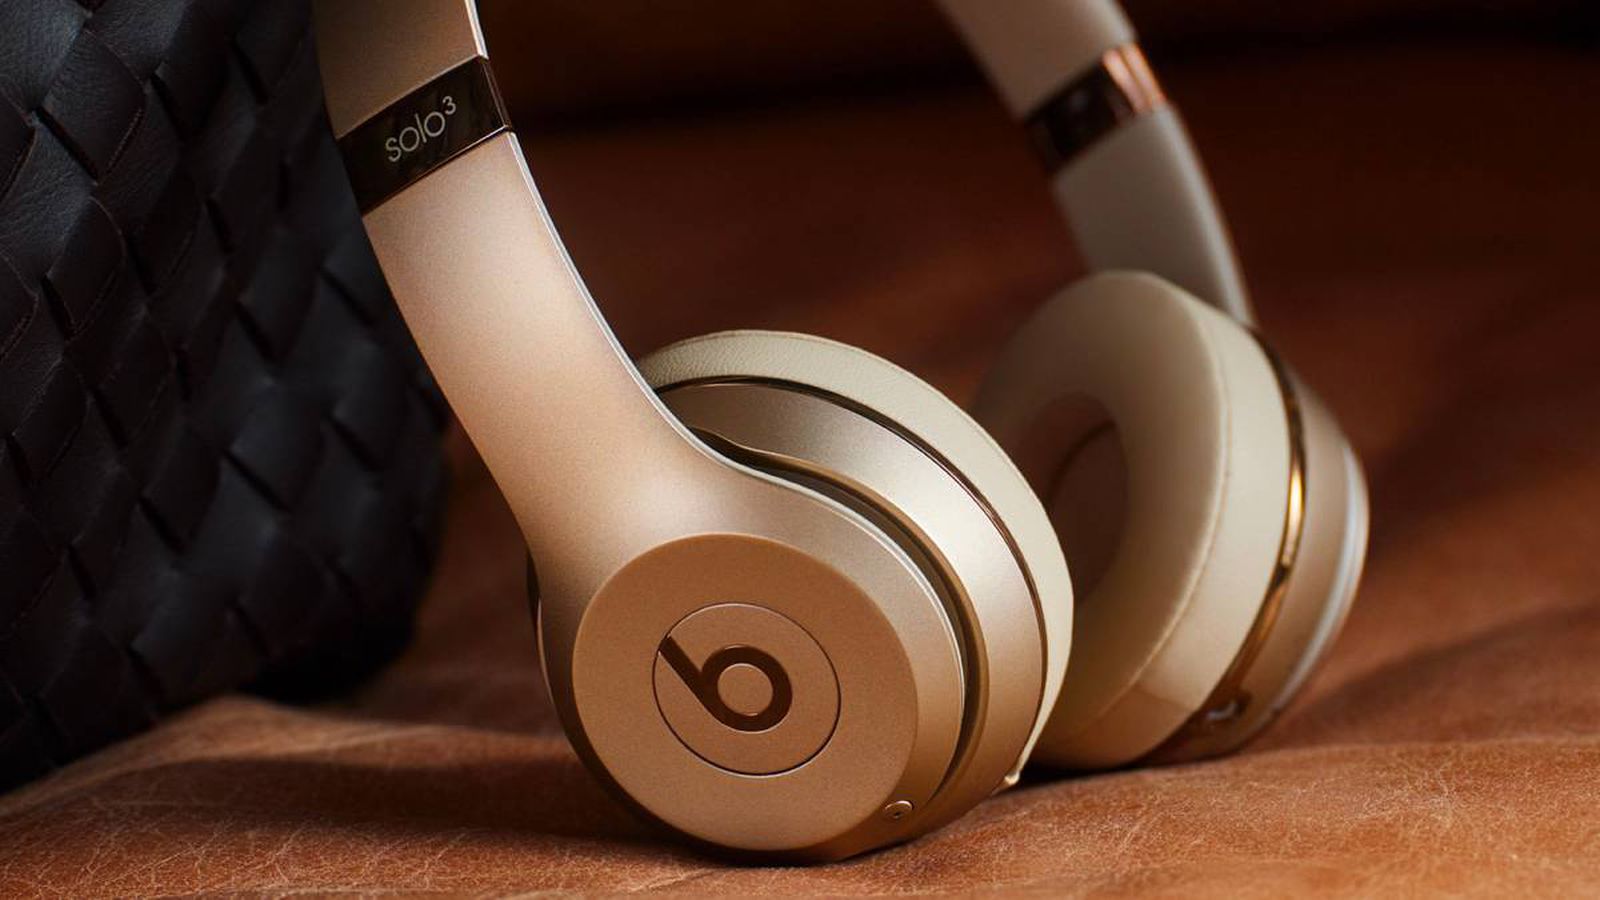 Apple's Old Beats Solo3 Headphones Available in Gold and Silver